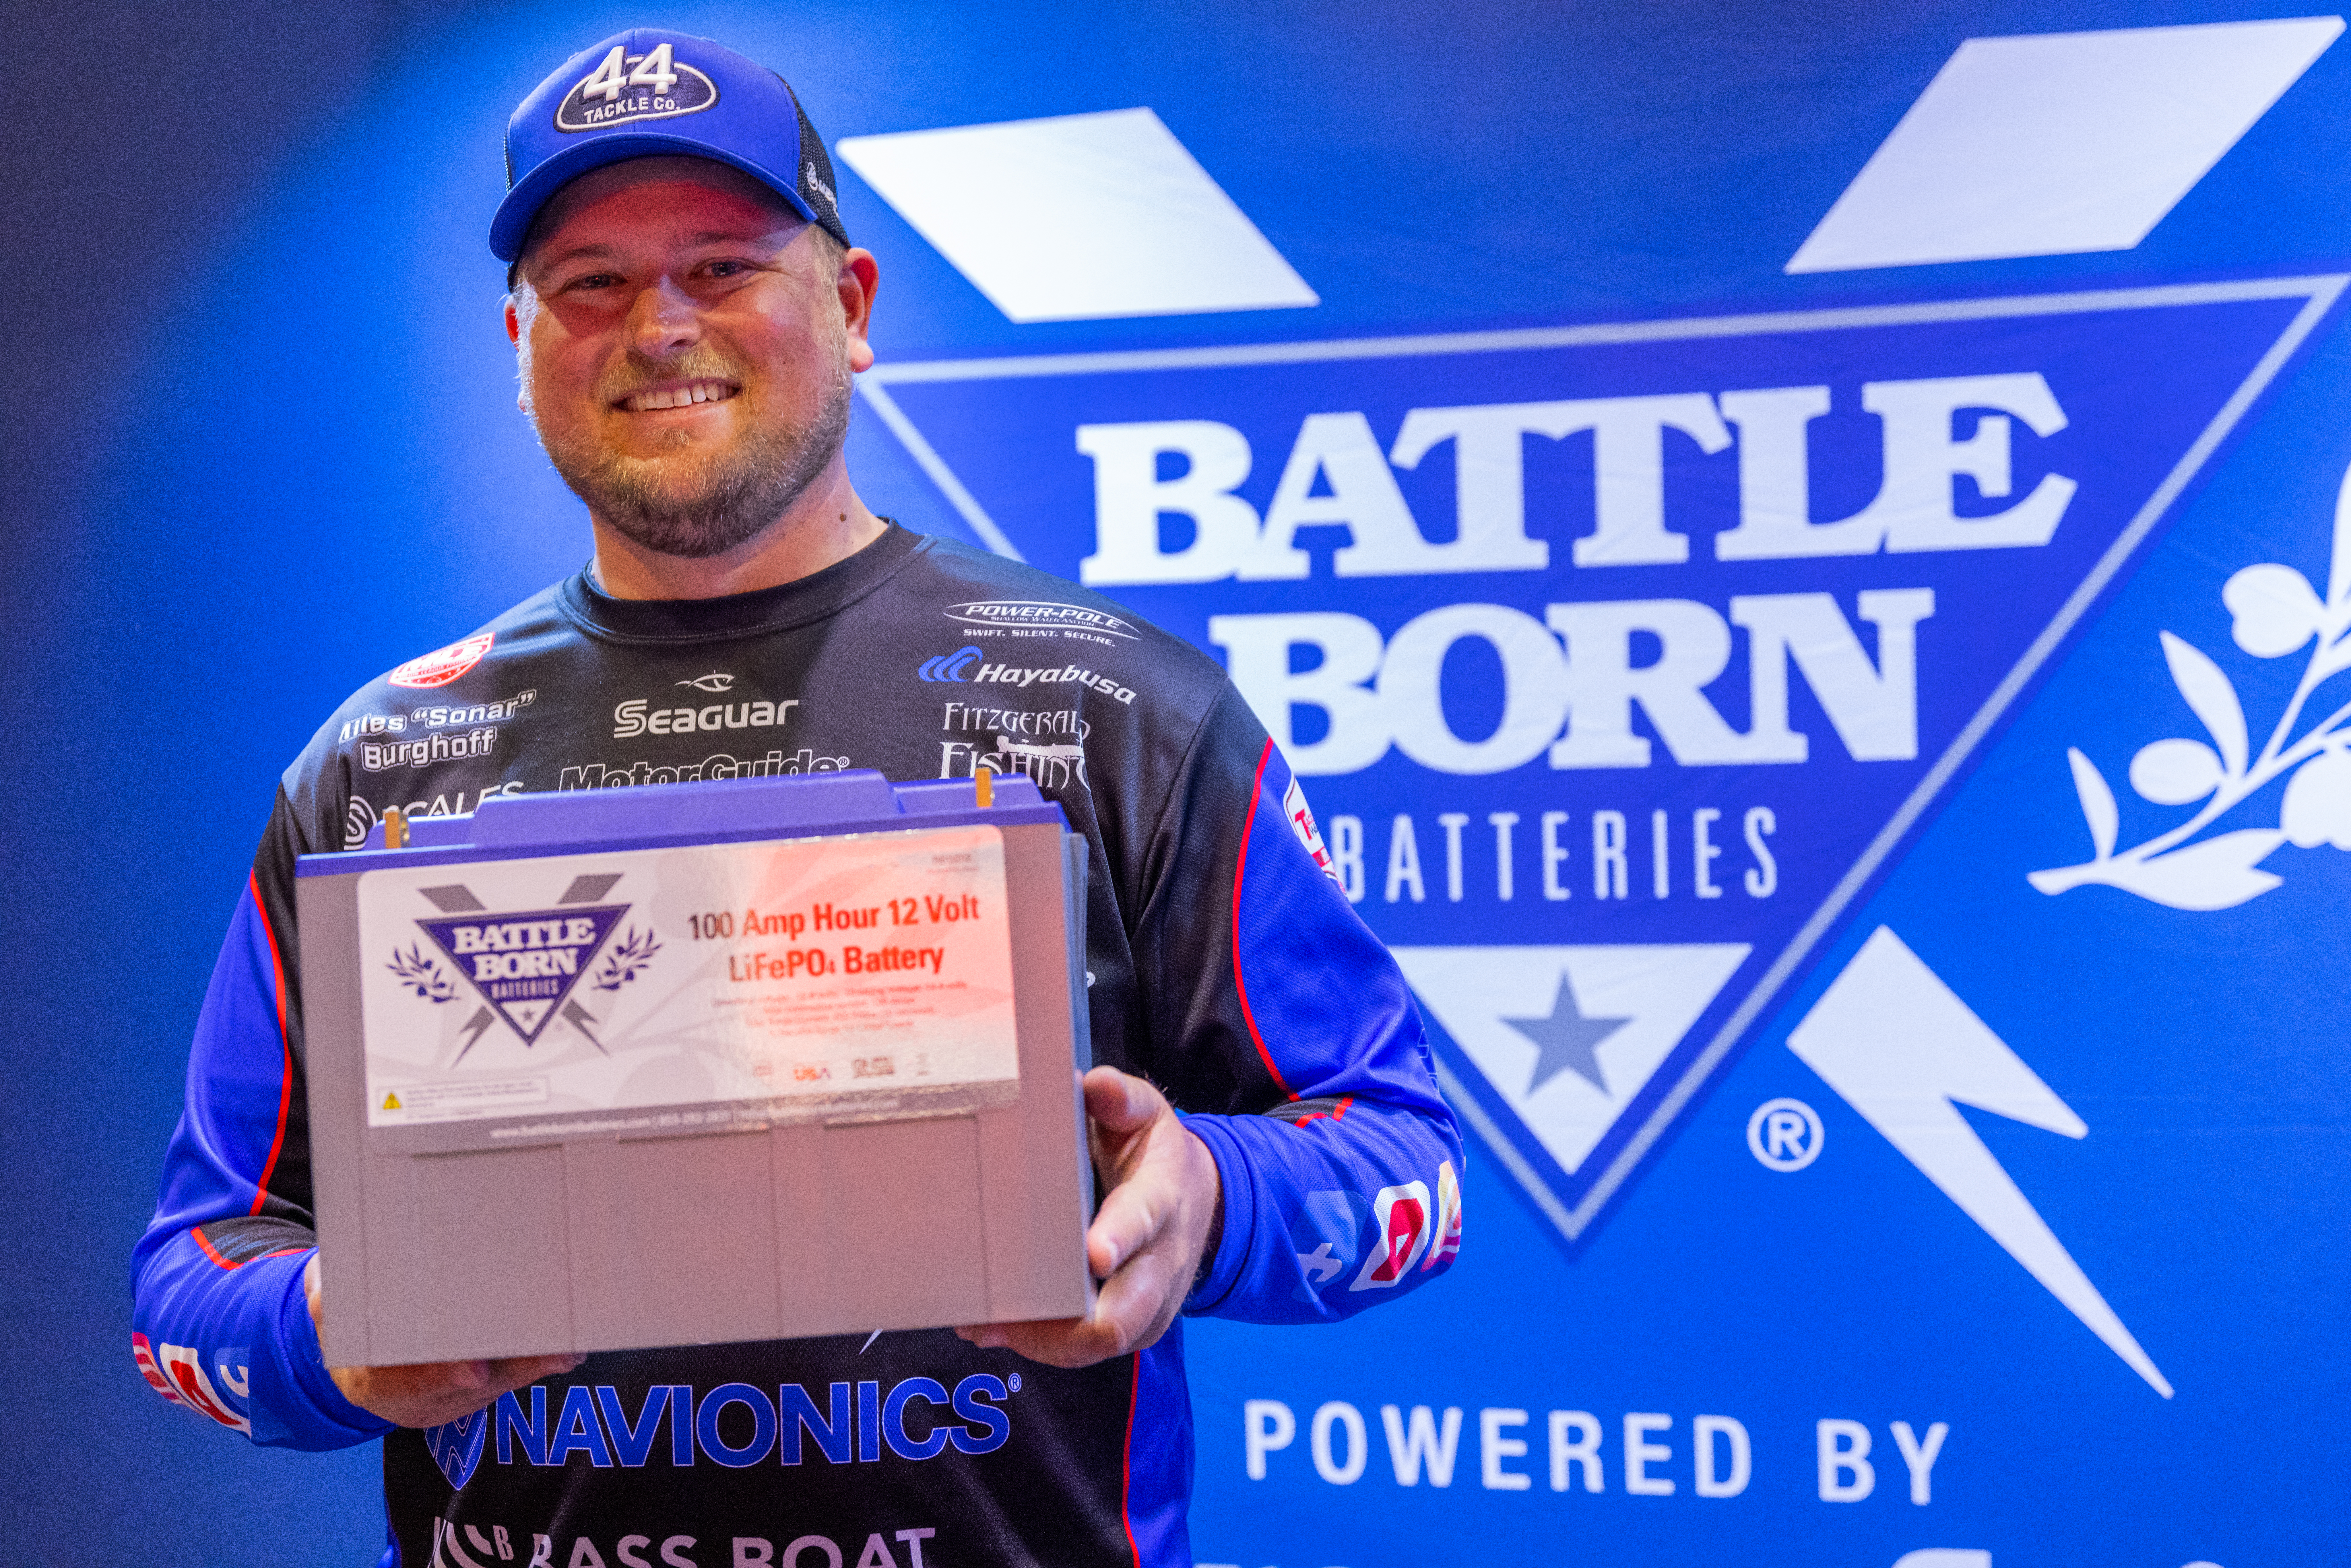 Professional Angler Miles Burghoff at the Battle Born Batteries Booth